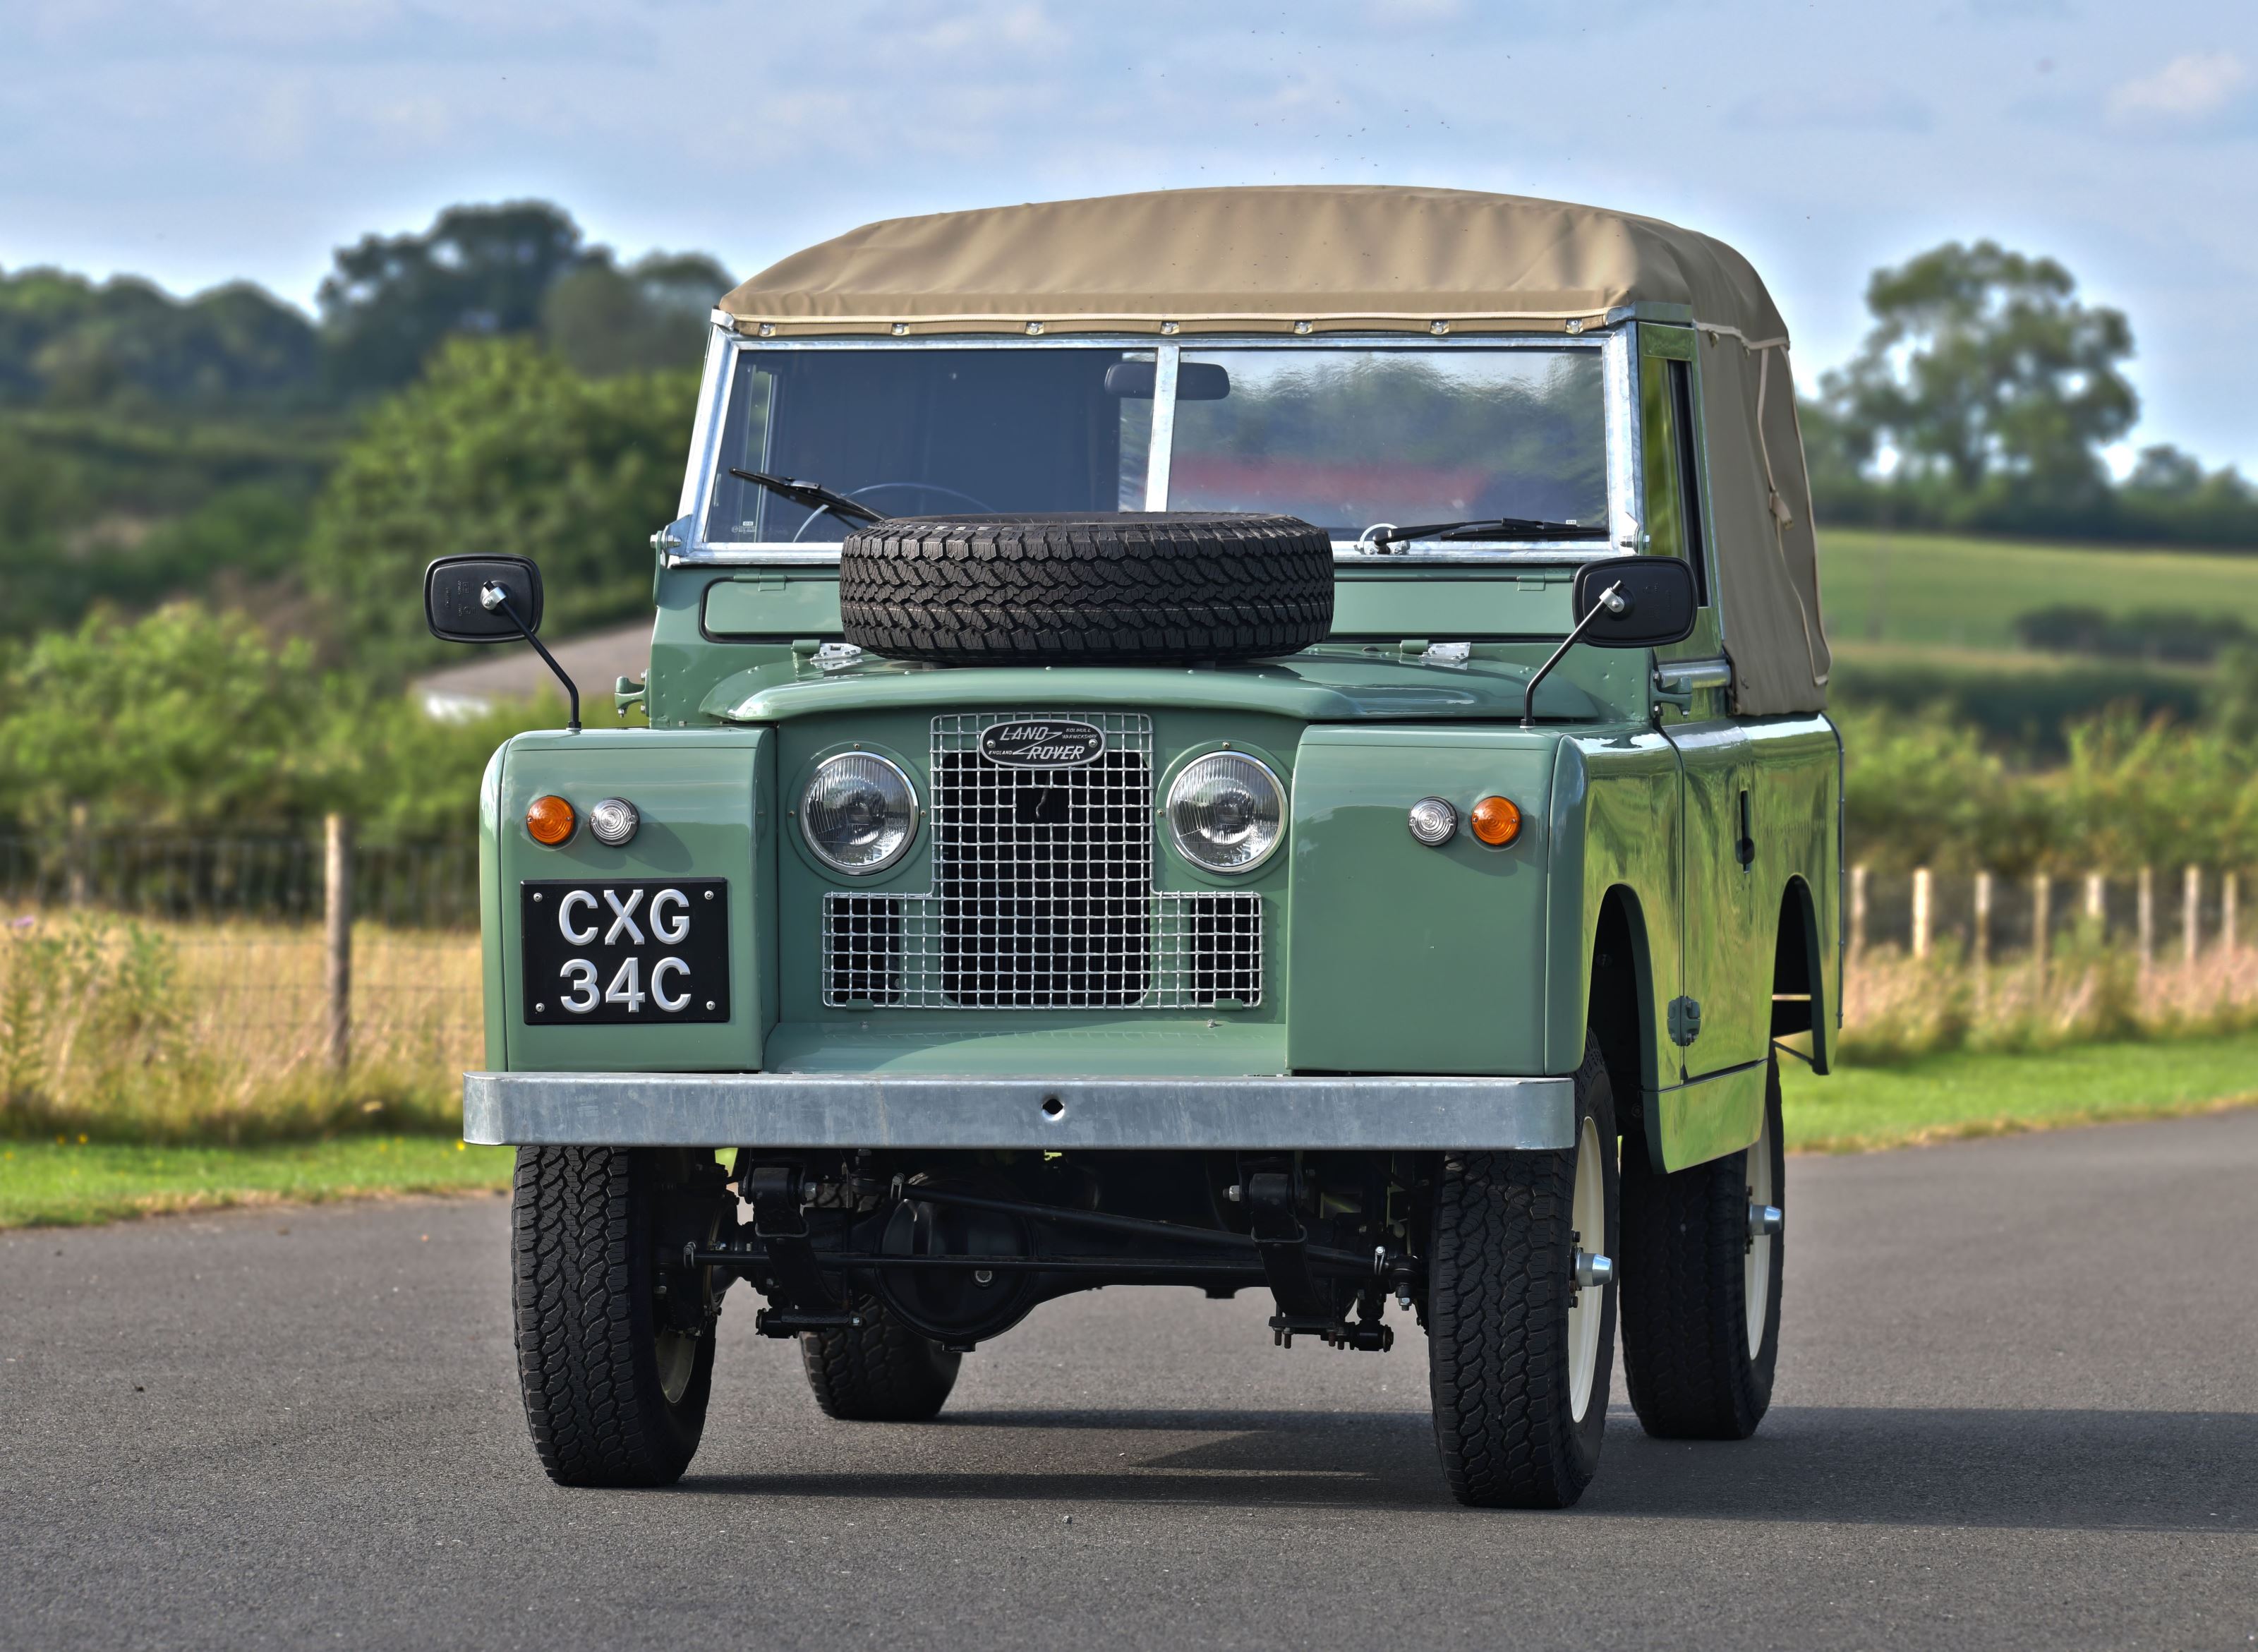 Land rover series 2a swb 88 with overdrive eorlgzqrmdc8em9f v0ty